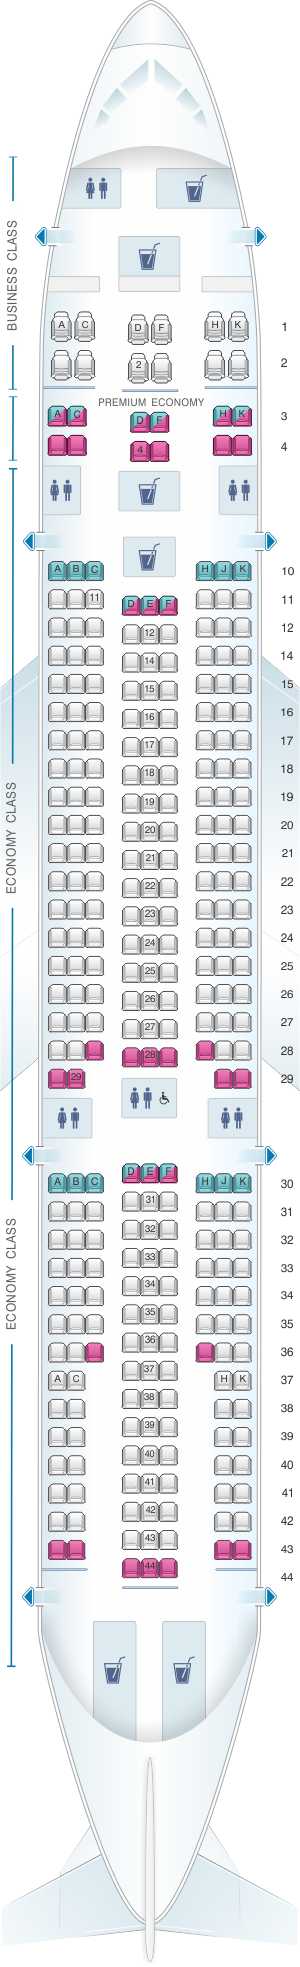 Seat map for Corsair Airbus A330 200